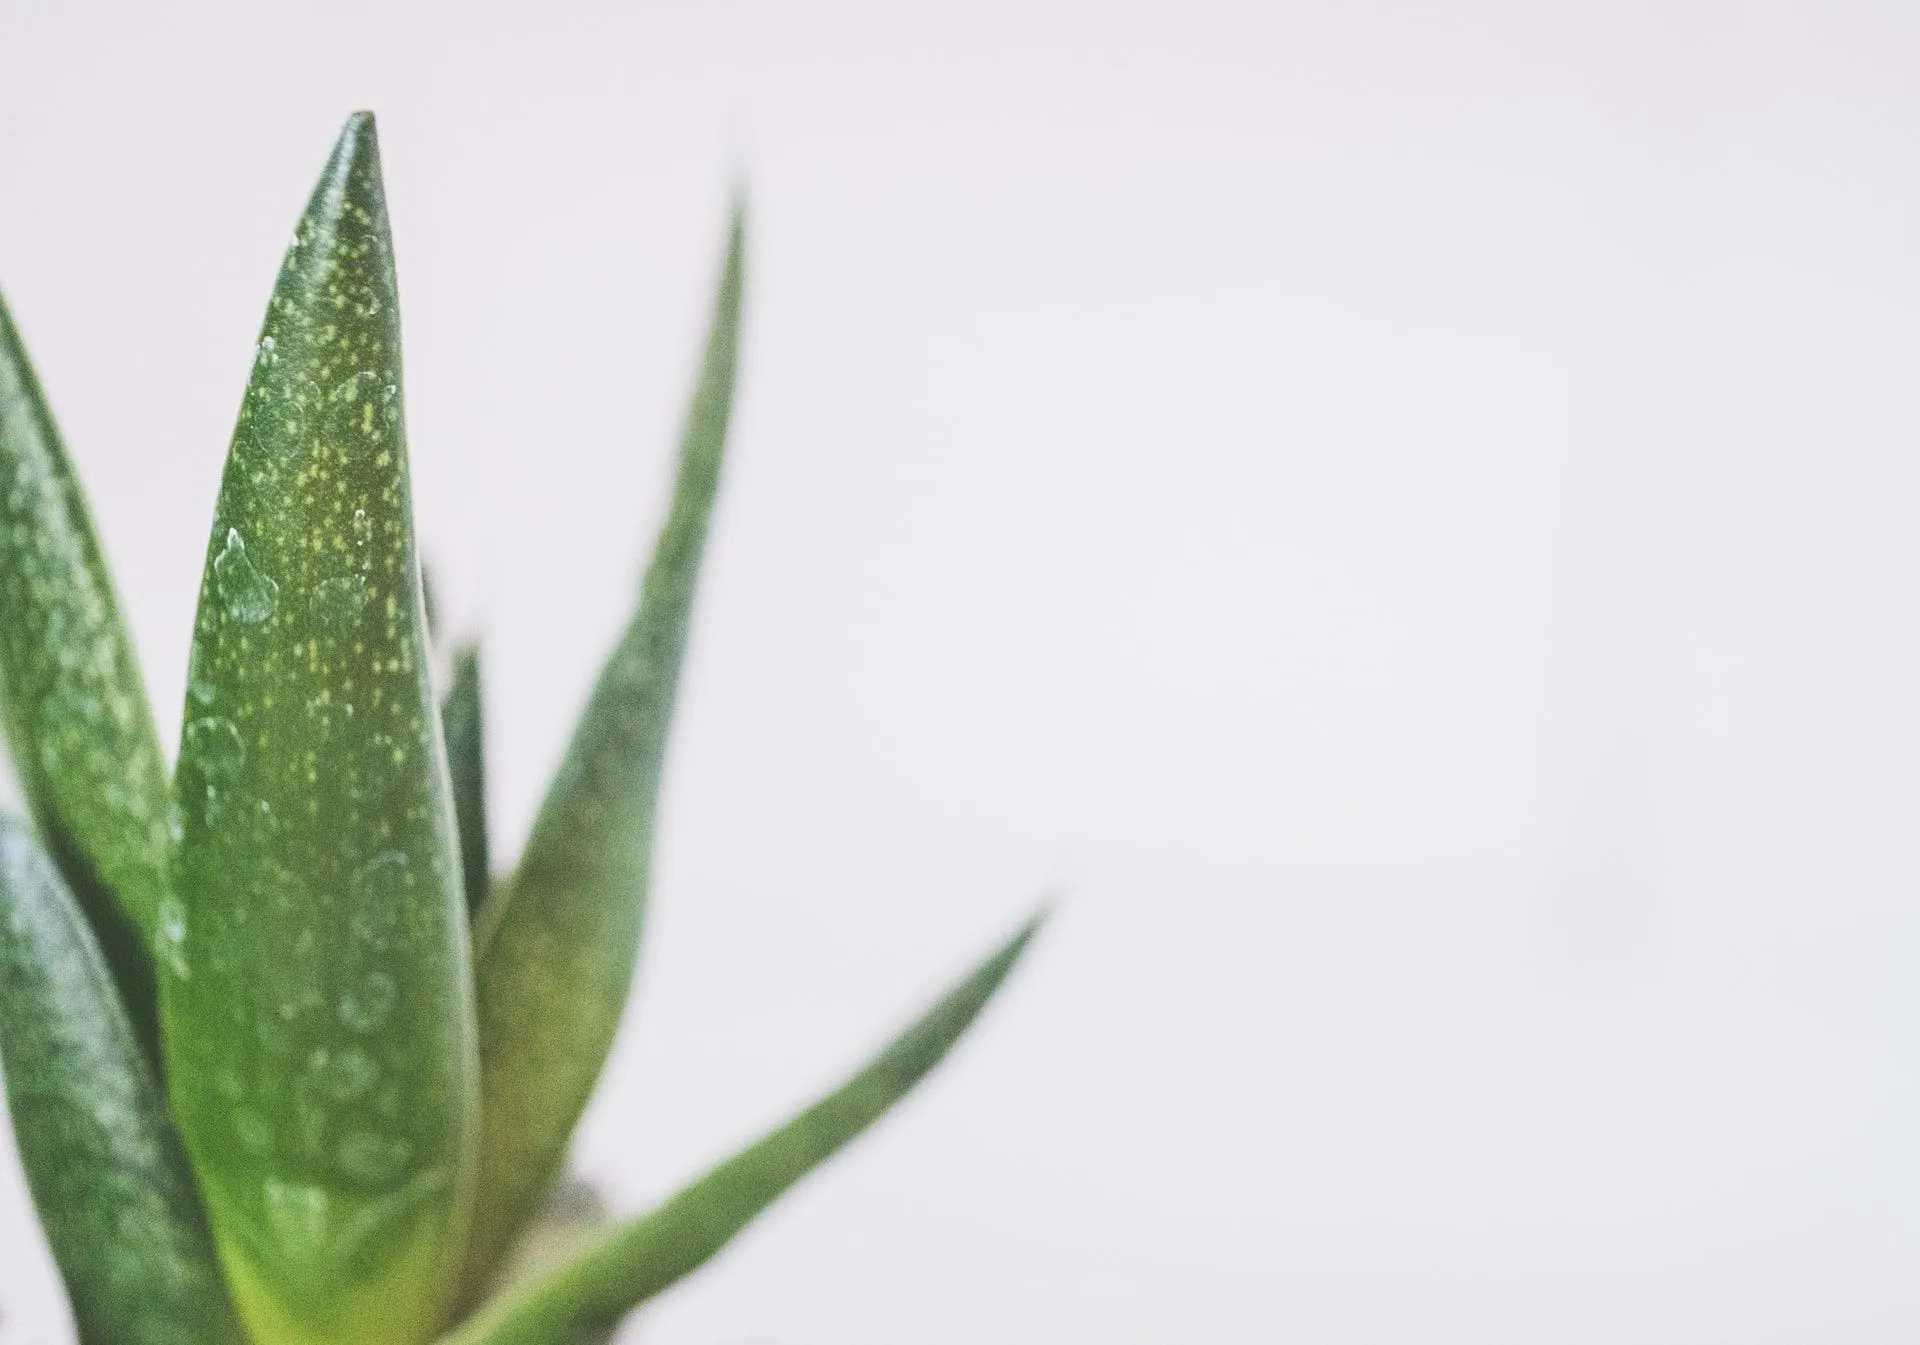 Aloe vera is widely used in many countries specifically for its wound-healing abilities.